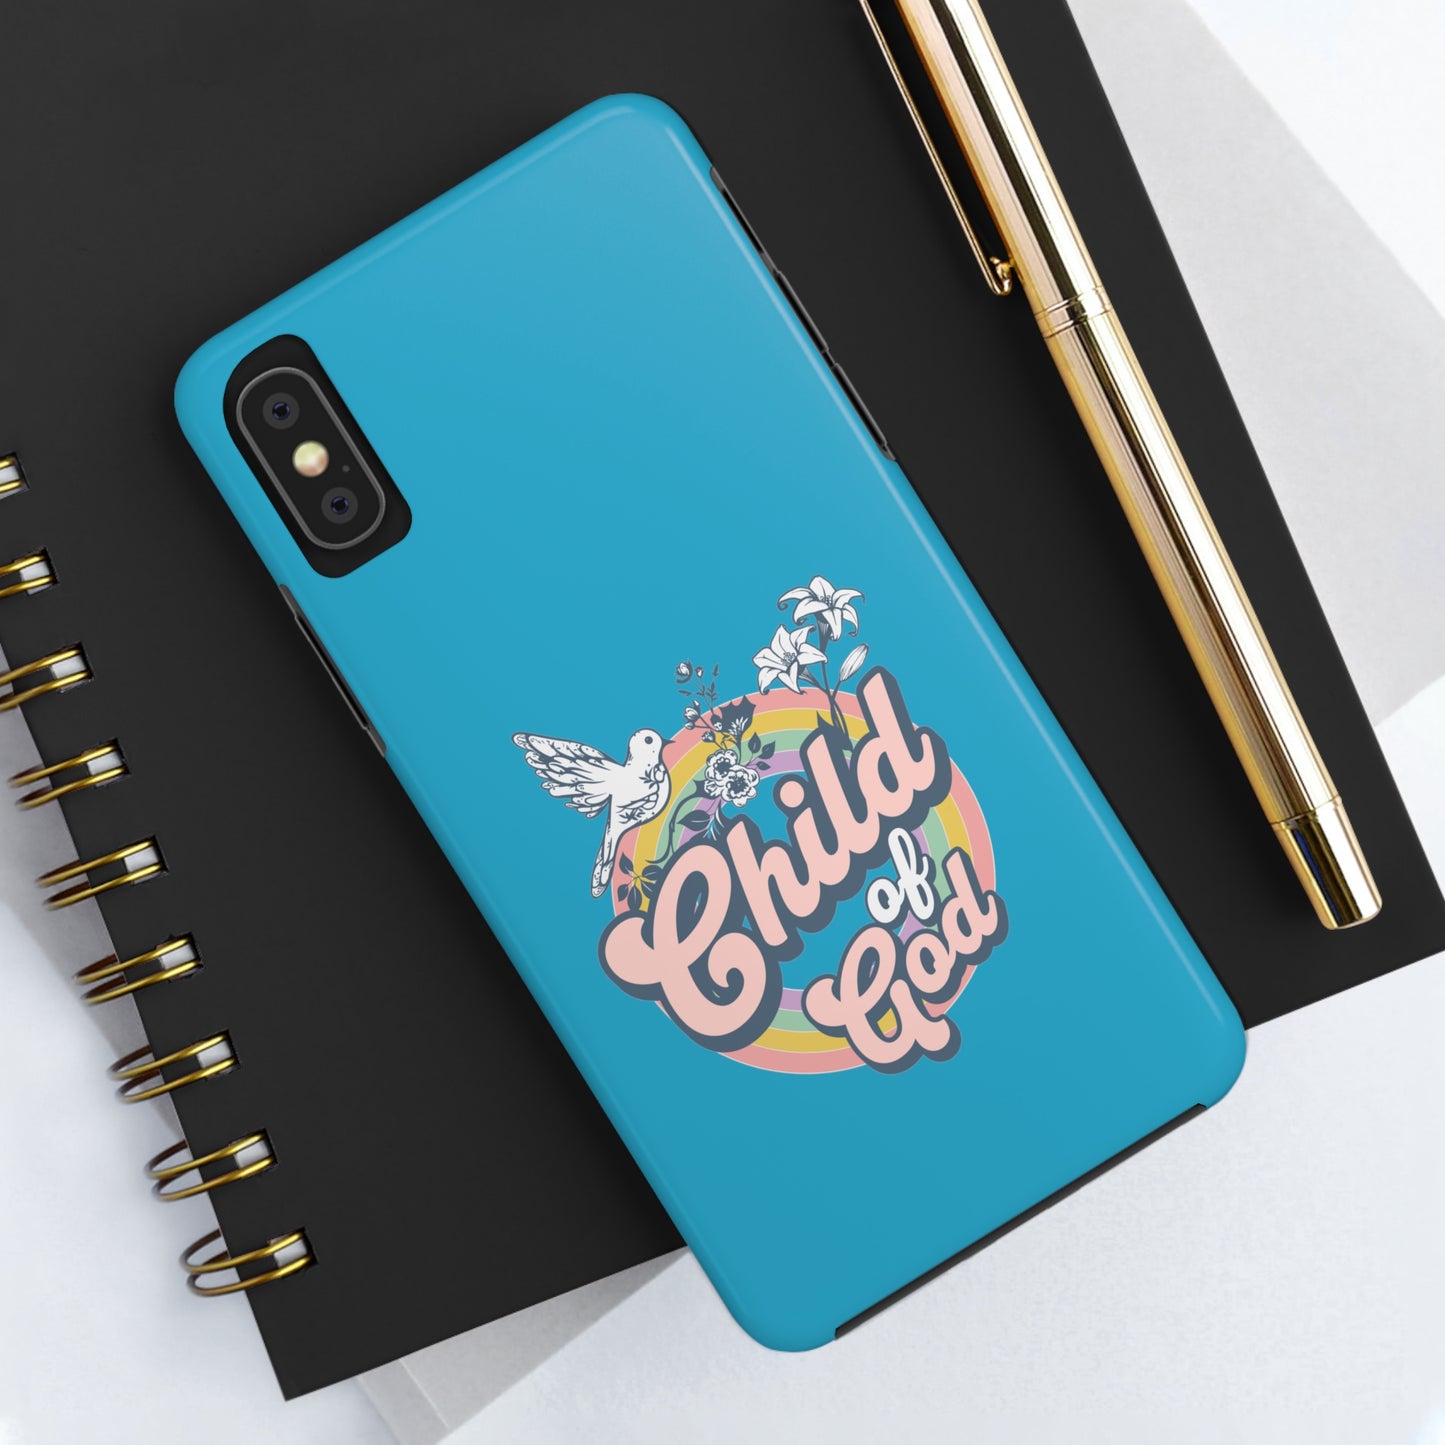 Child of God Tough Phone Cases - Turquoise